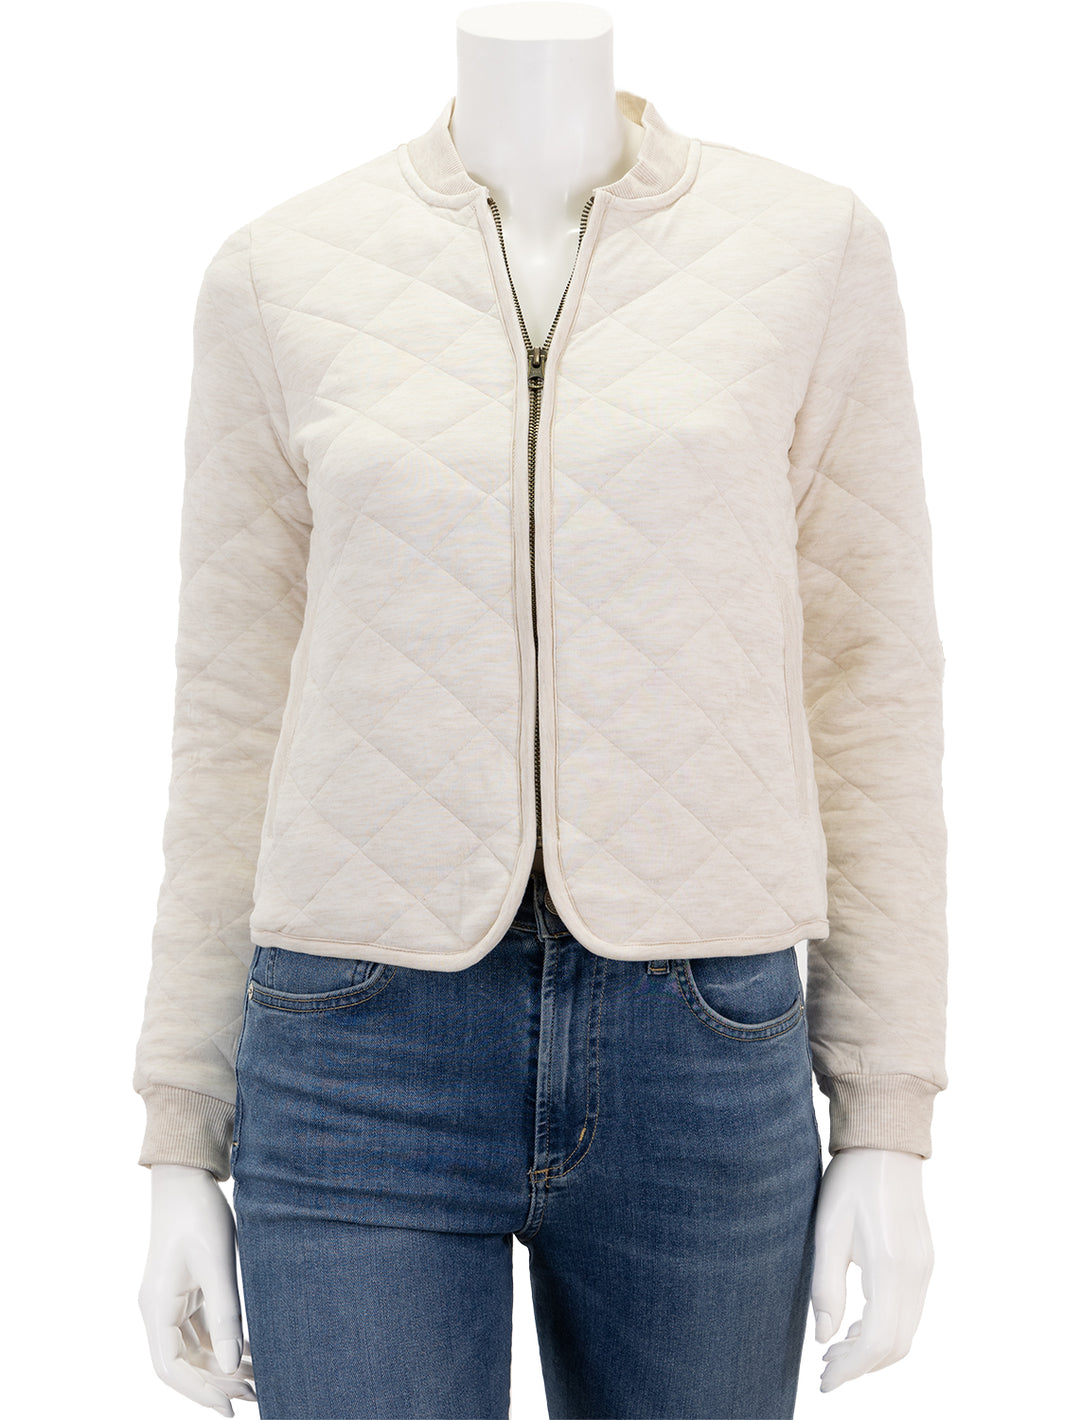 Front view of Marine Layer's updated corbet quilted bomber in antique white, zipped.